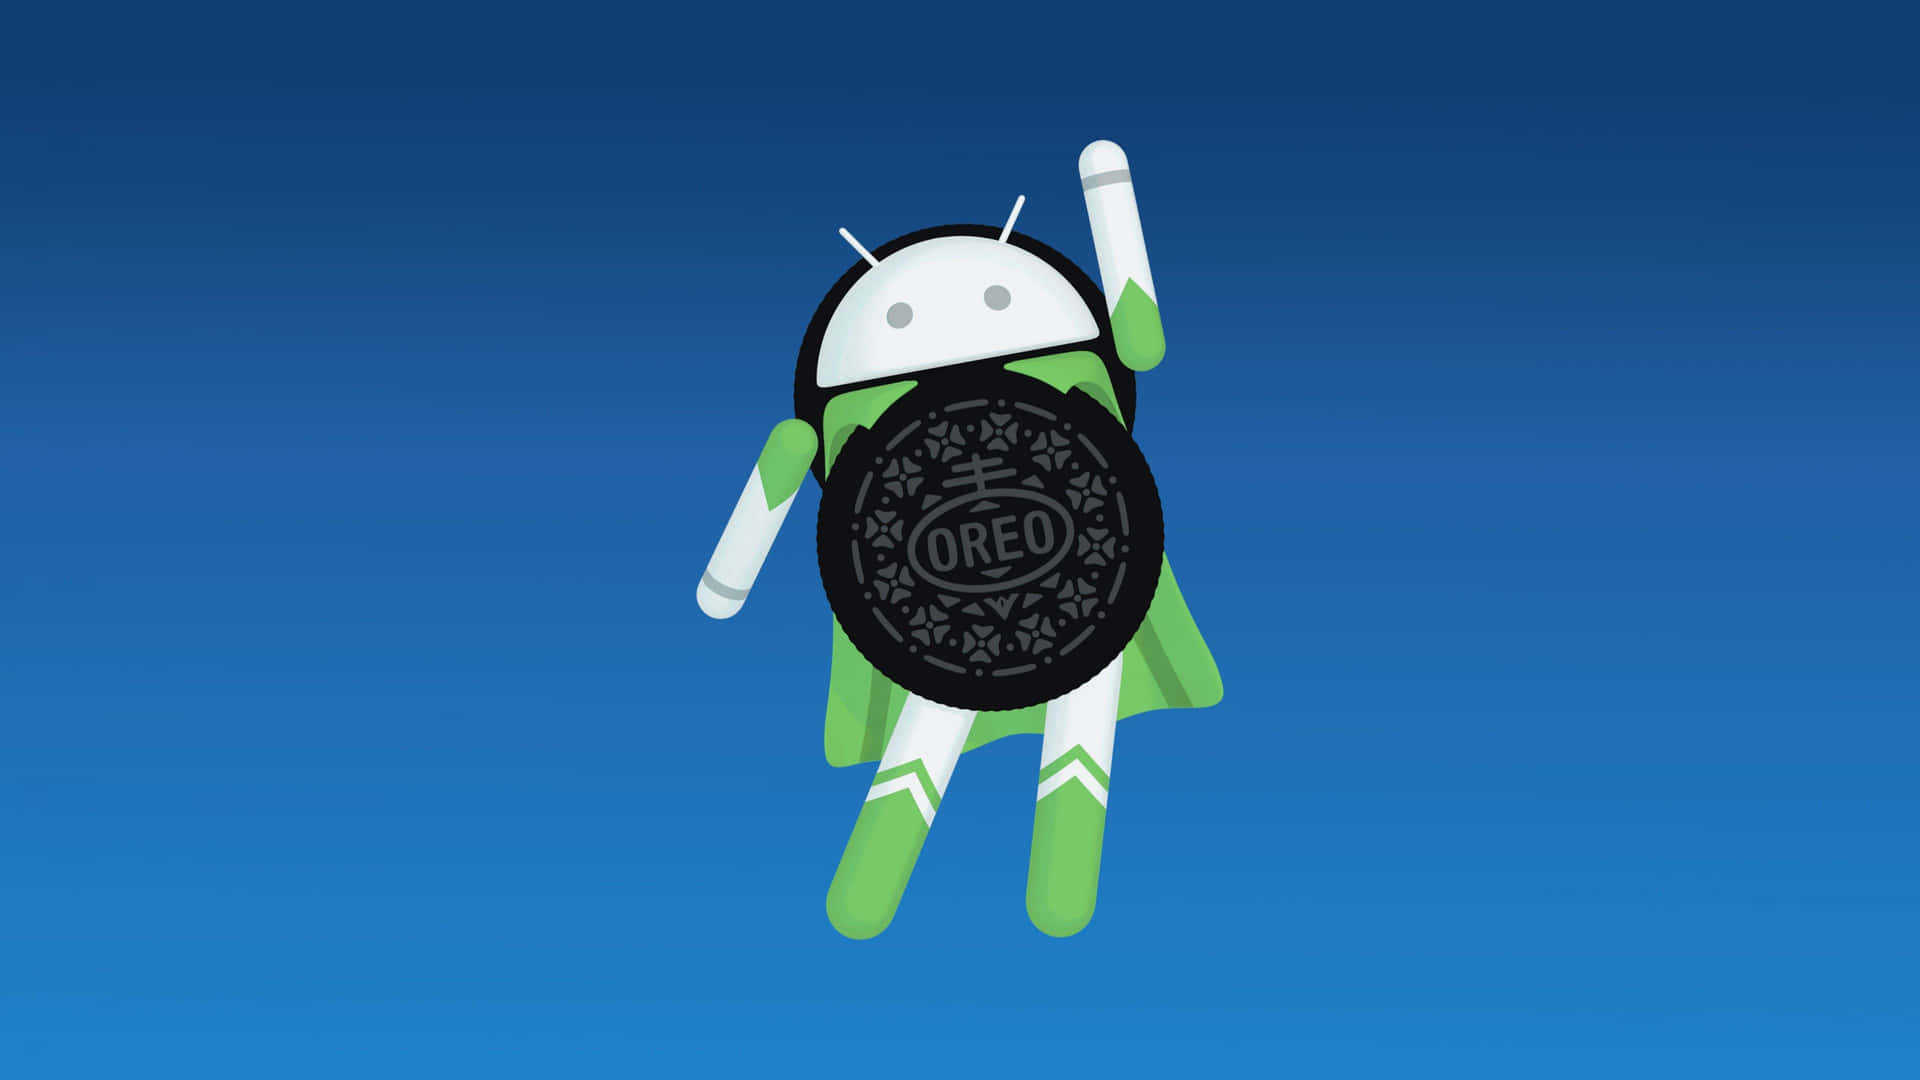 Oreo - A Robot Flying In The Air Wallpaper